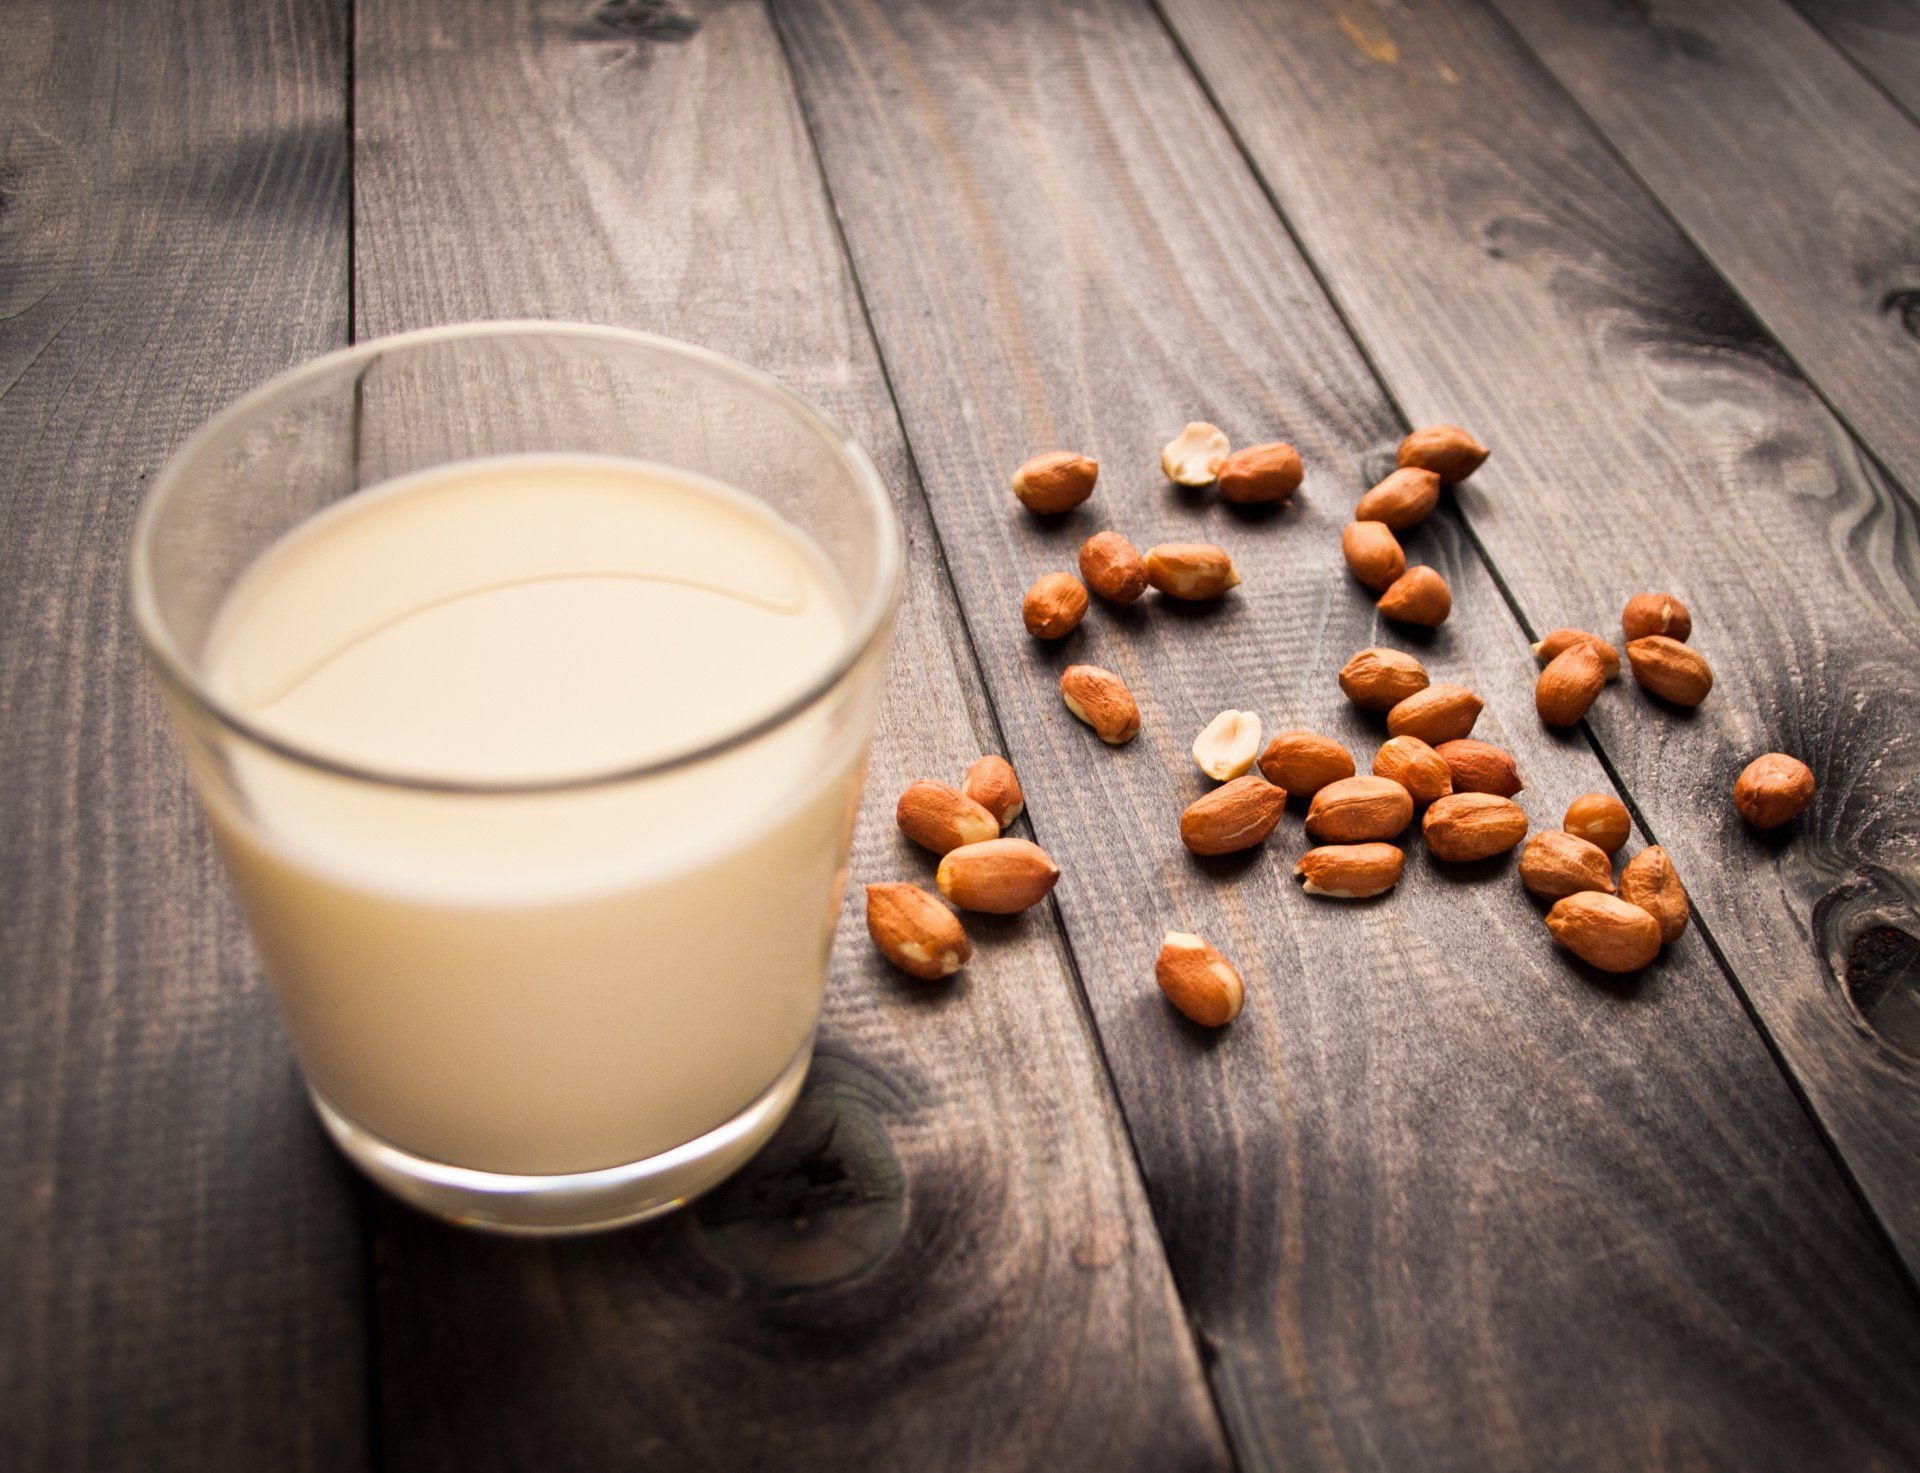 A glass of peanut milk is on a wooden table next to peanuts.